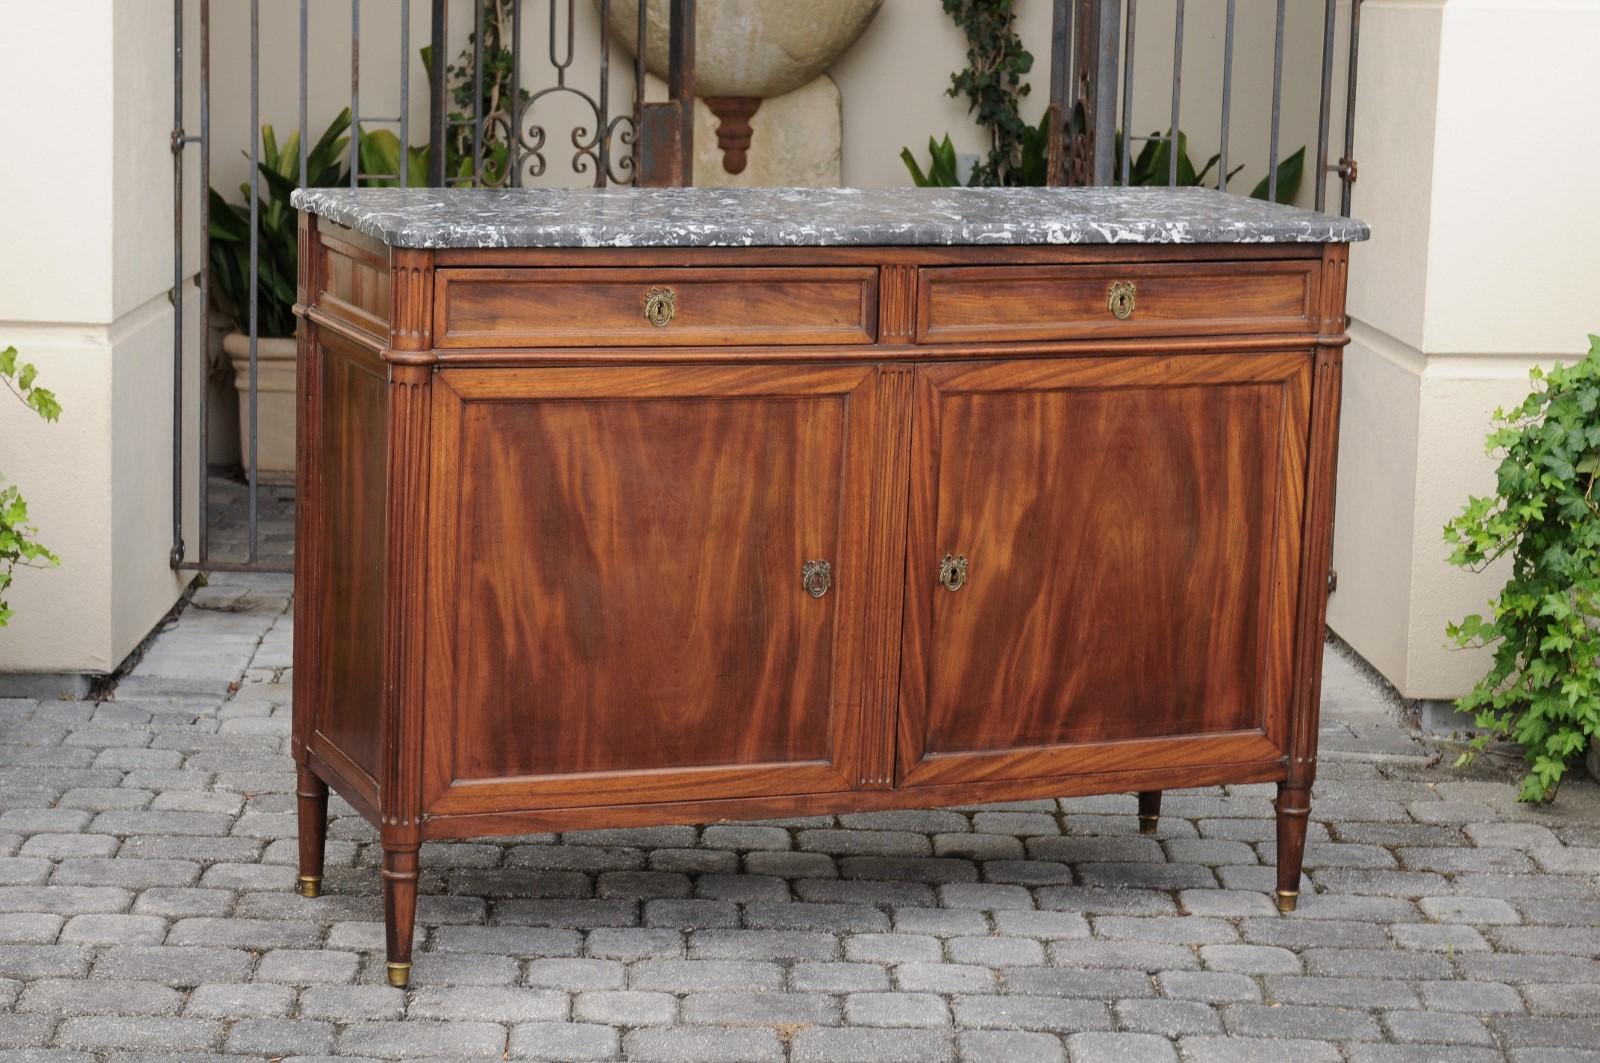 A French walnut buffet from the late 19th century, with grey marble top, two drawers and two doors. Born in France during the third quarter of the 19th century, this walnut buffet features a grey veined marble top, sitting above two dovetailed